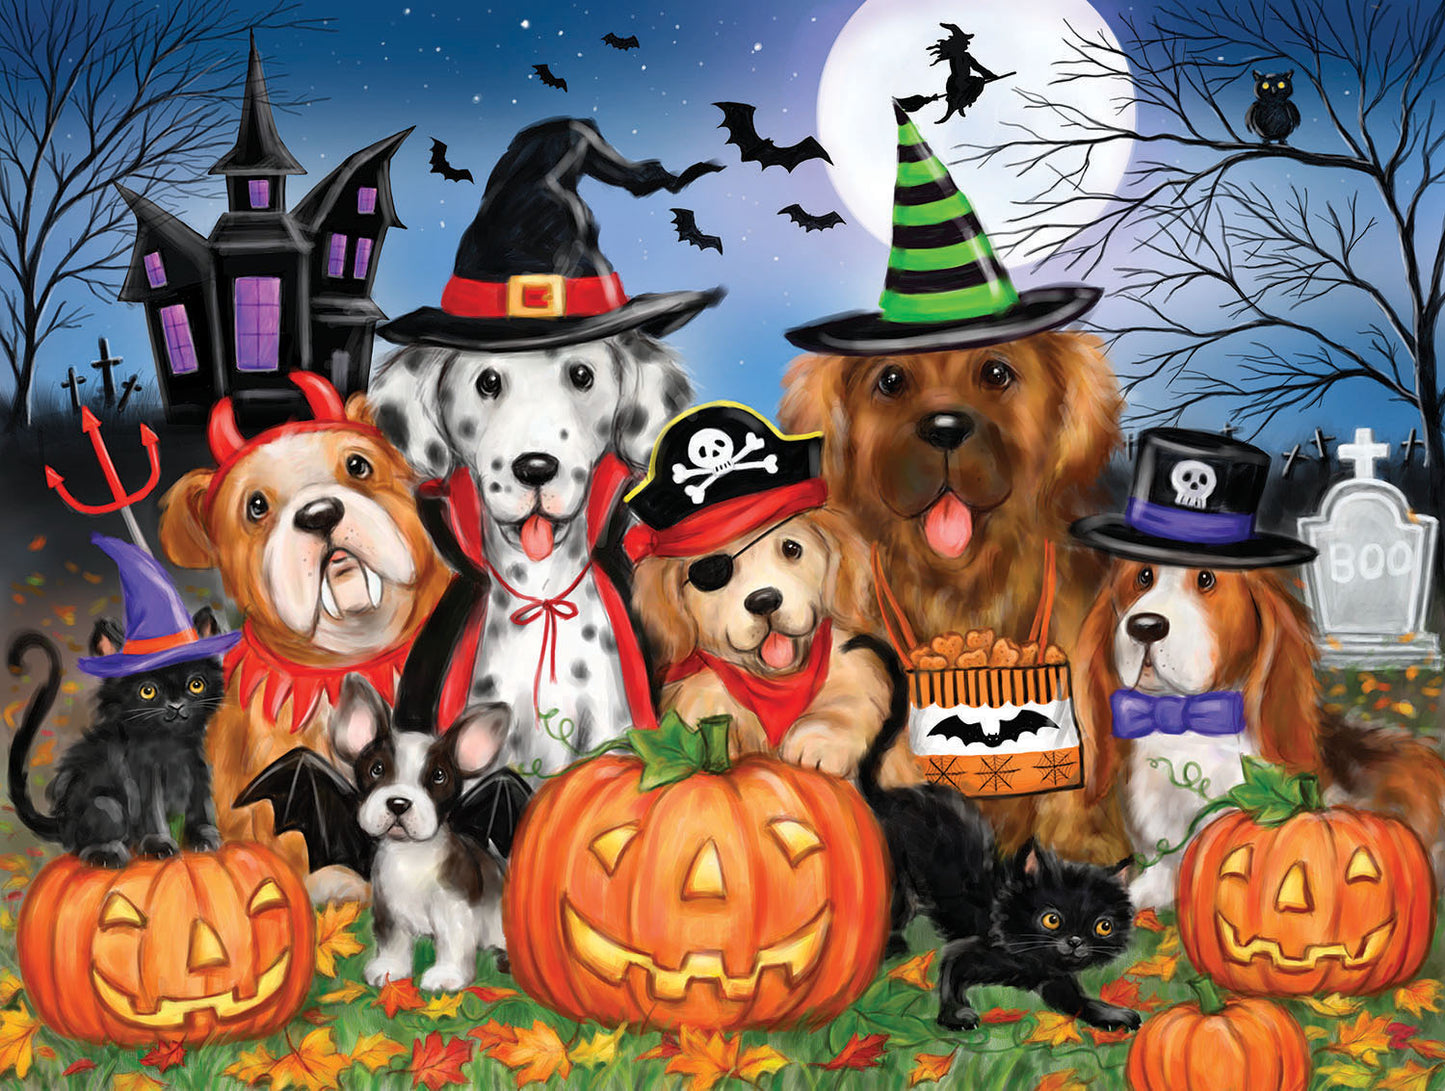 Ready for Halloween - 300 Piece Jigsaw Puzzle